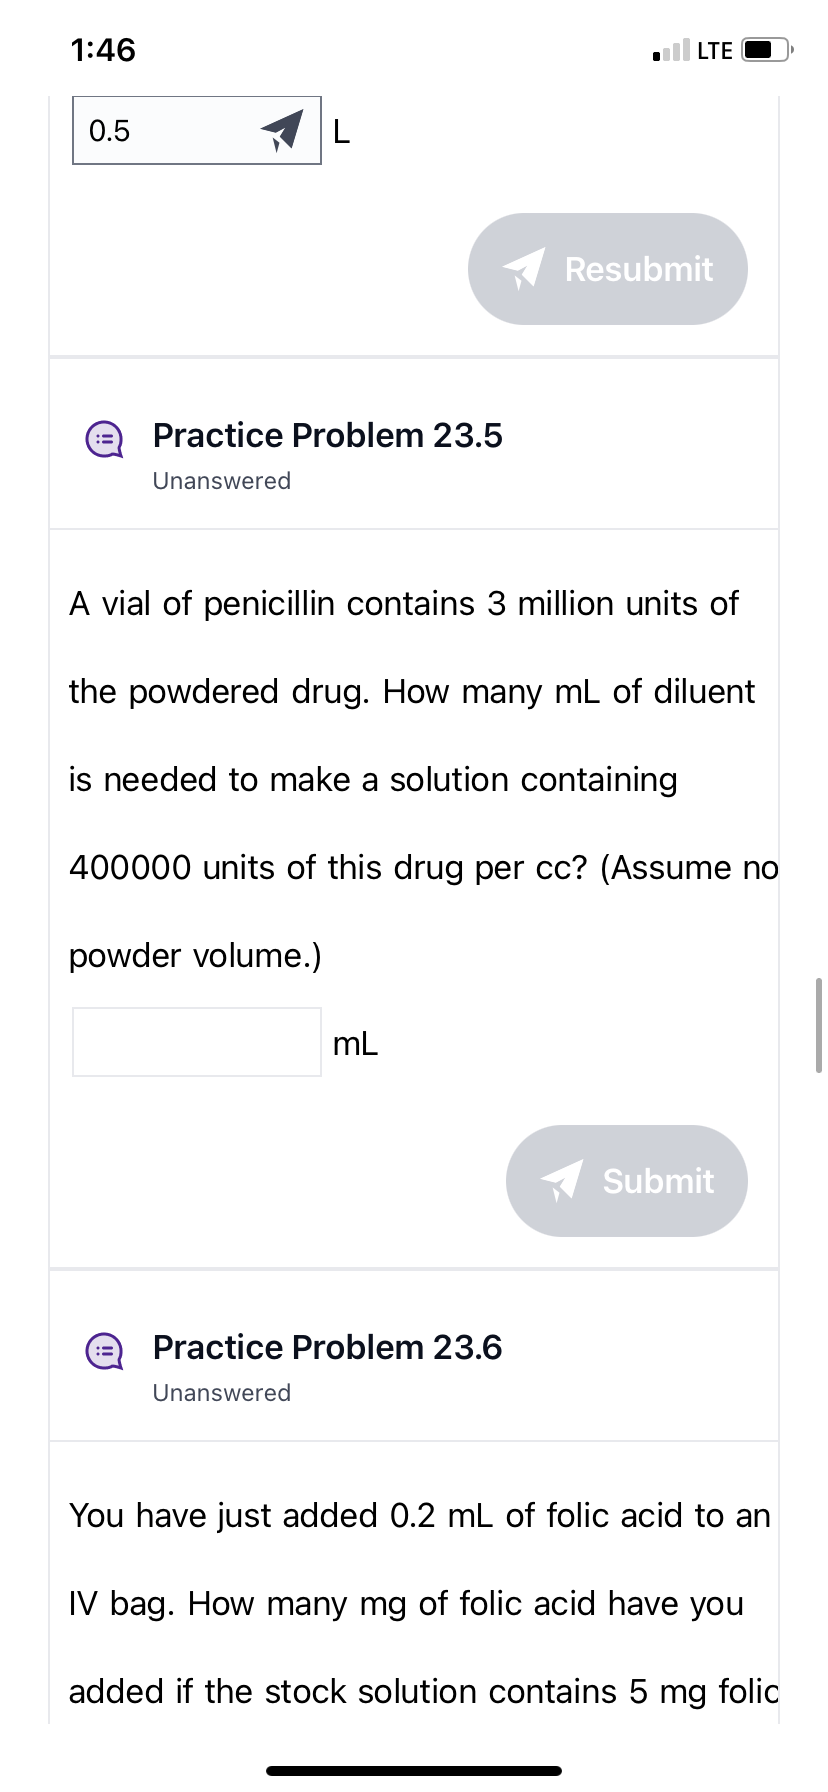 1:46
0.5
L
Practice Problem 23.5
Unanswered
powder volume.)
:3
A vial of penicillin contains 3 million units of
the powdered drug. How many mL of diluent
is needed to make a solution containing
400000 units of this drug per cc? (Assume no
mL
.LTE
Practice Problem 23.6
Unanswered
Resubmit
Submit
You have just added 0.2 mL of folic acid to an
IV bag. How many mg of folic acid have you
added if the stock solution contains 5 mg folic